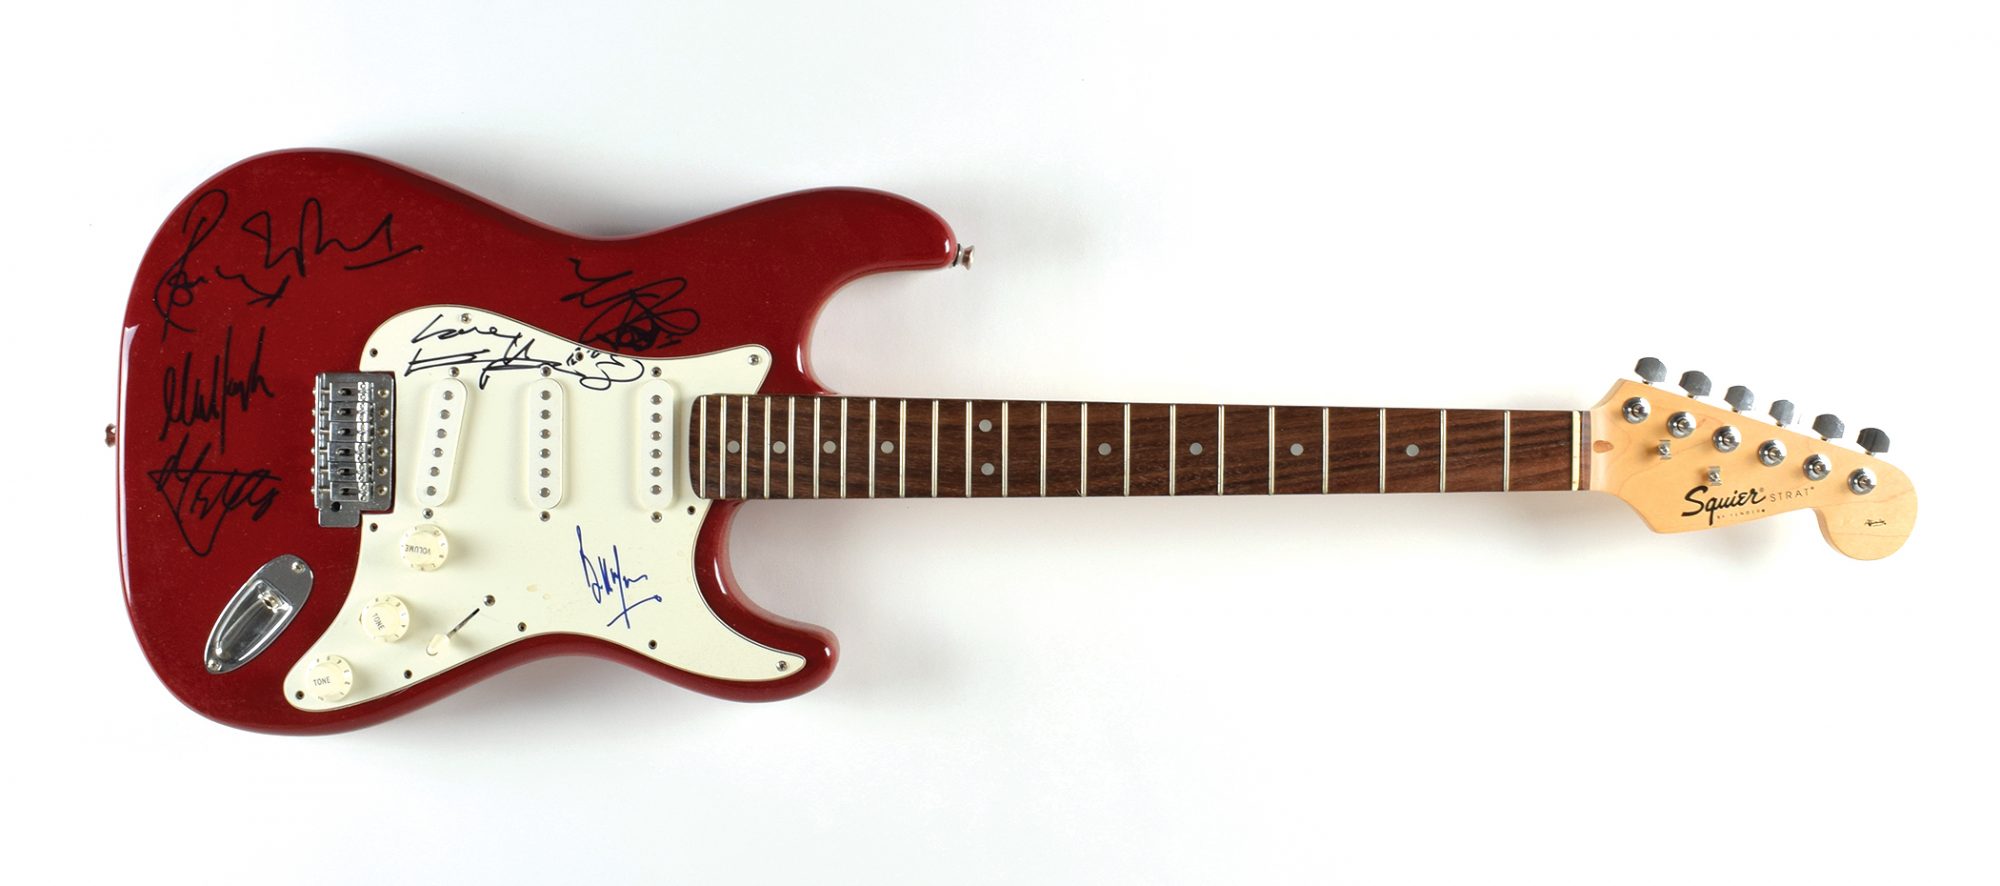 Stratocaster autographed by the Rolling Stones Mick Jagger Ron Wood Mick Taylor Charlie Watts Keith Richards Bill Wyman John Brennan Collection RR Auction